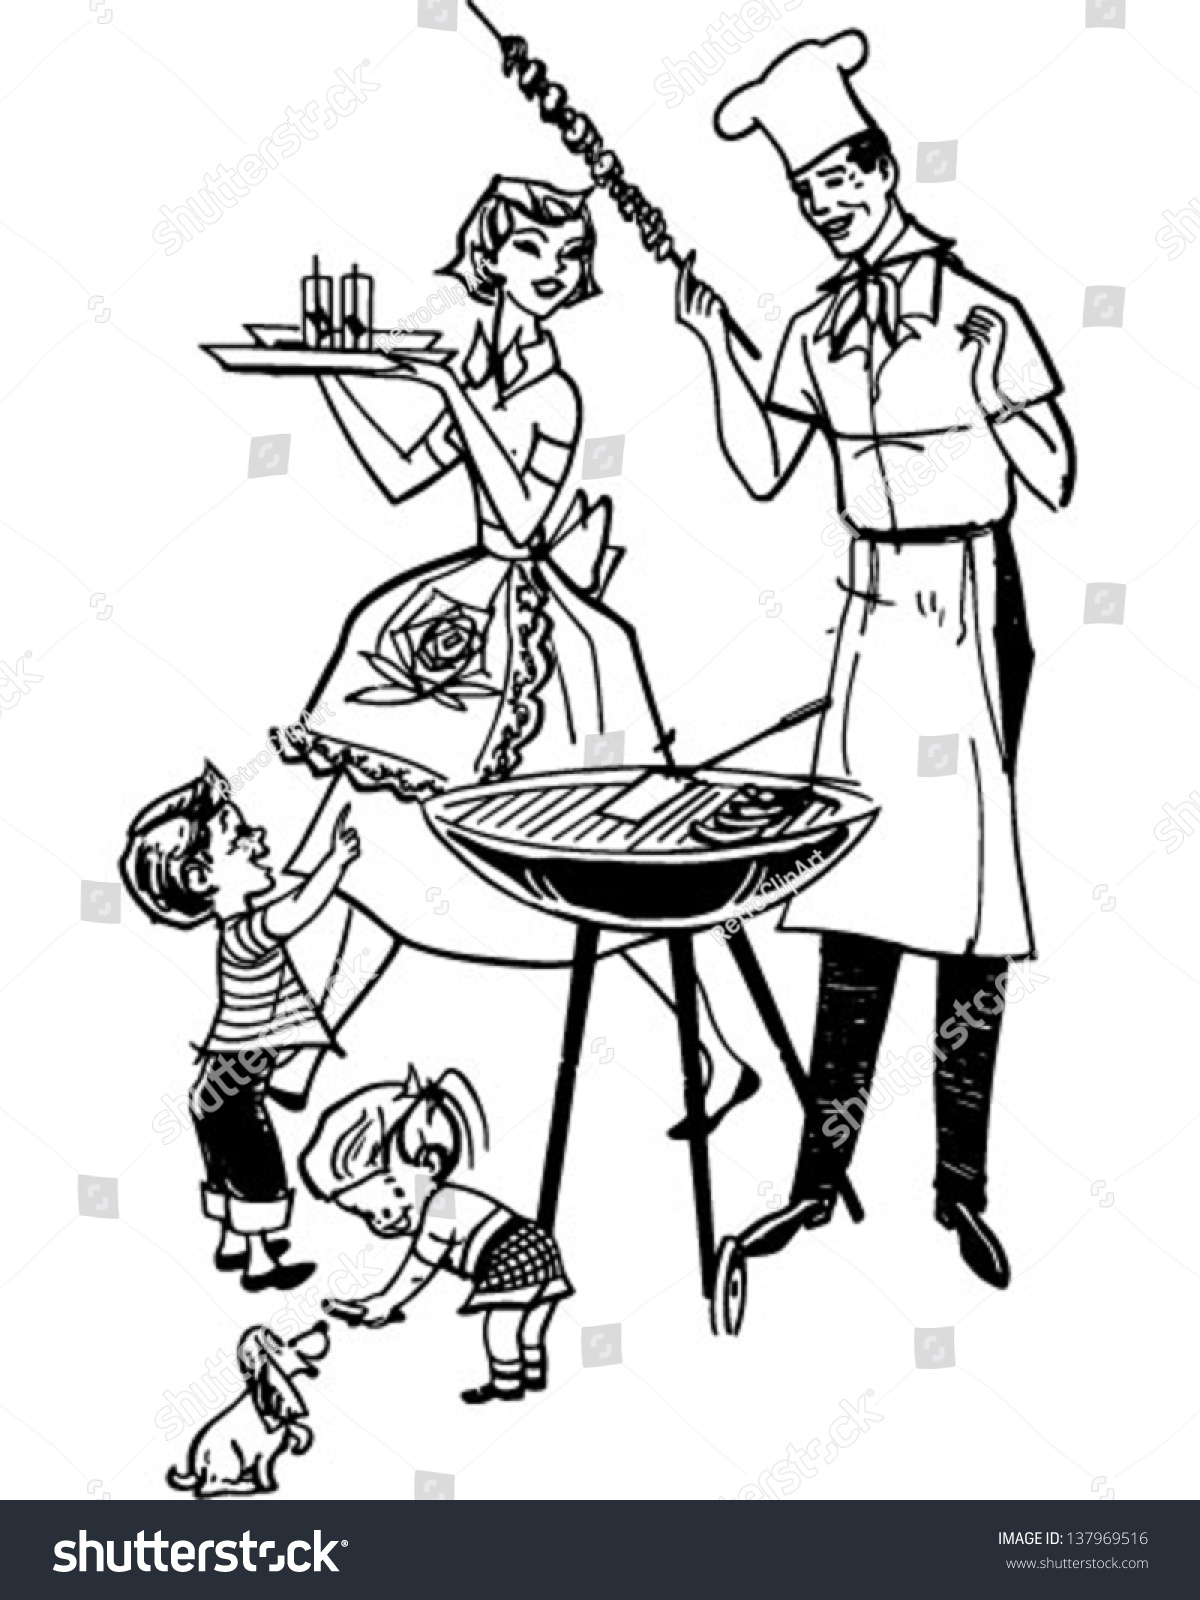 family barbecue clipart - photo #16